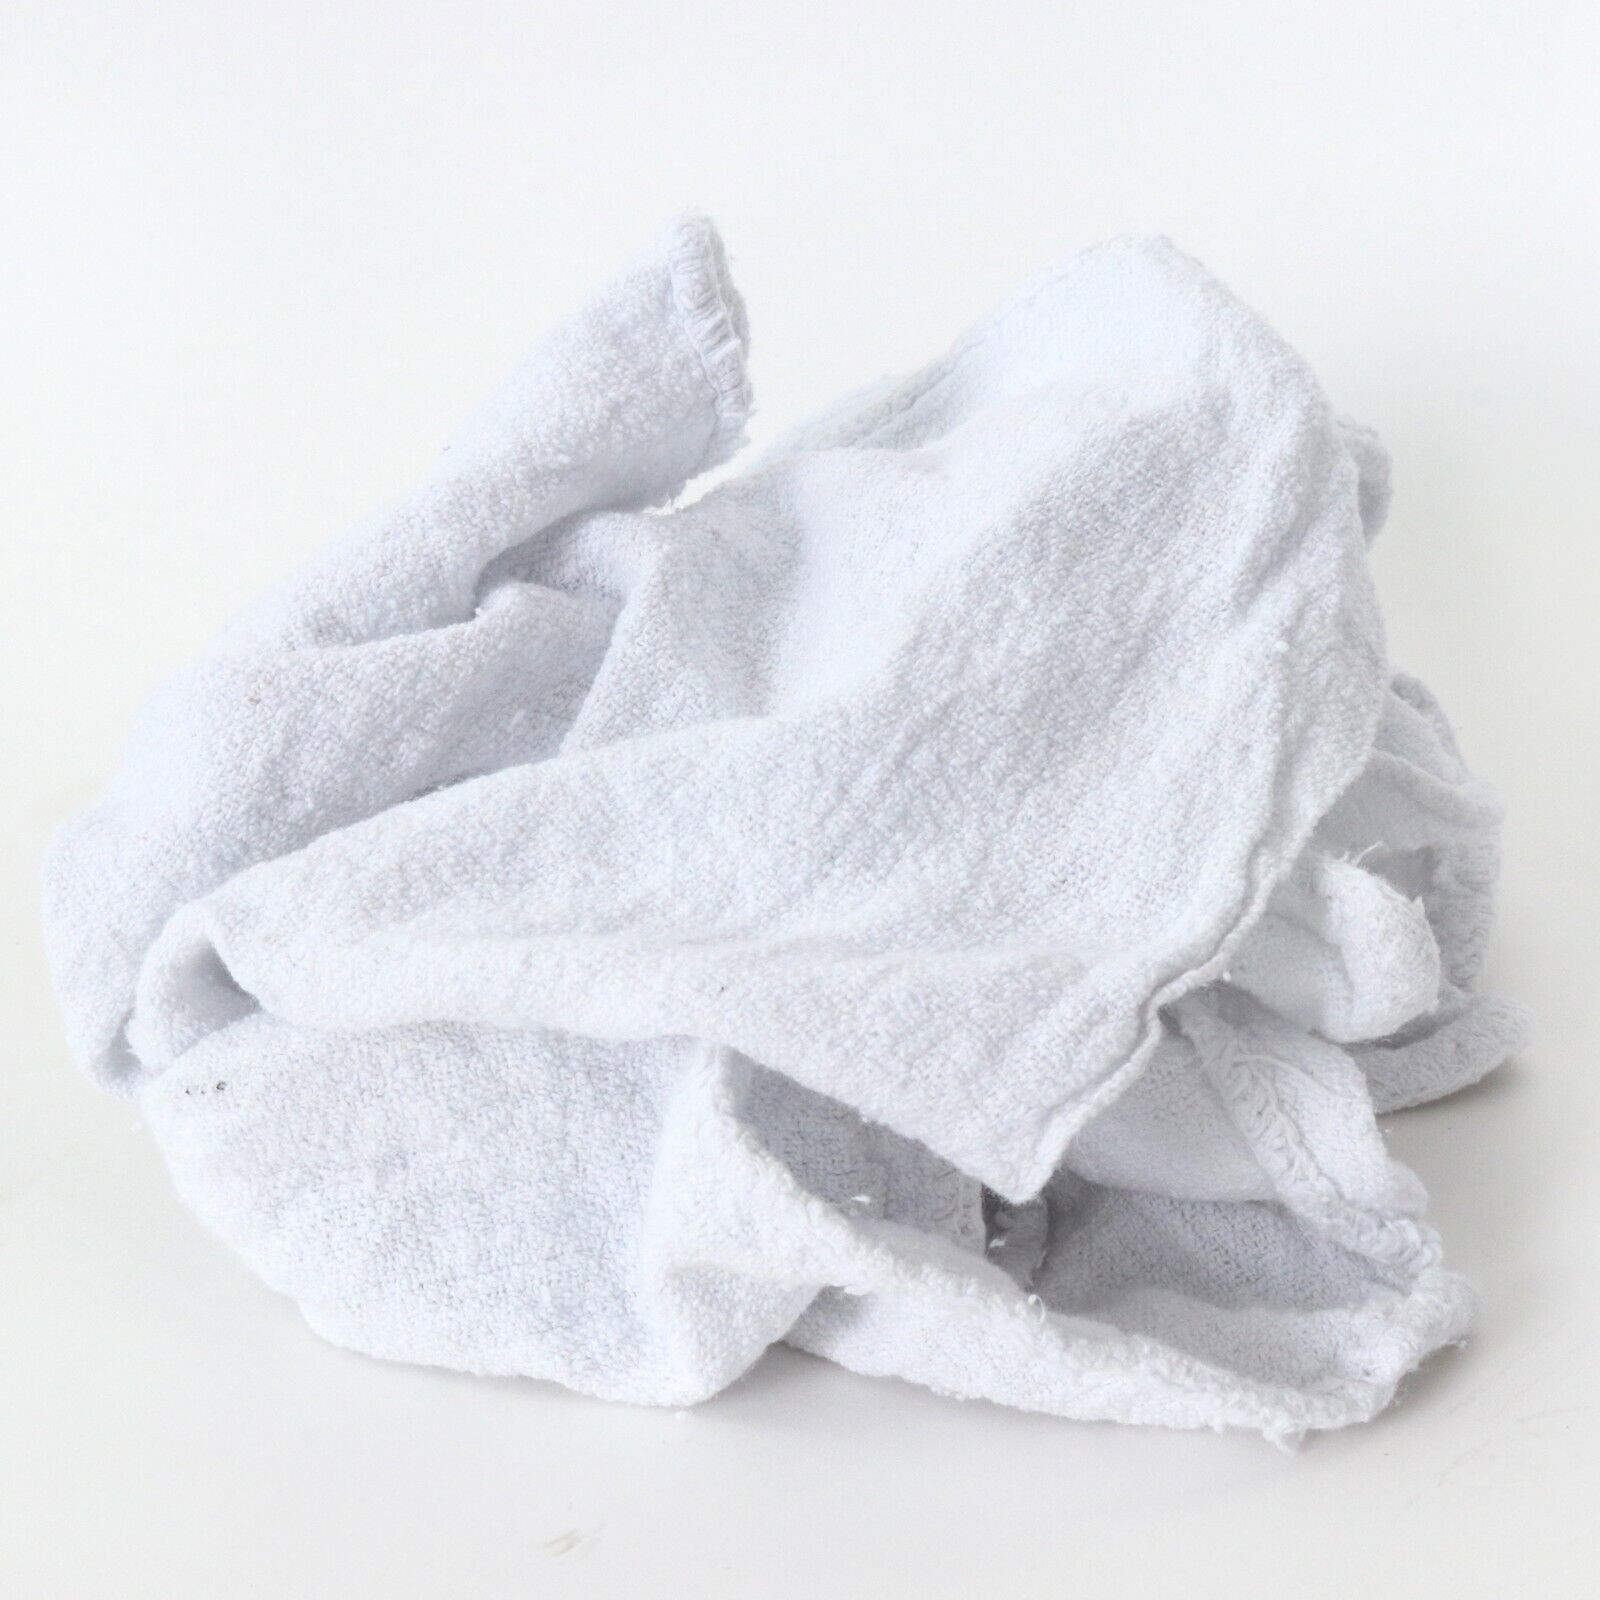 Bulk Lot of 100 White Shop Towels 12" x 14" Cleaning Rags Homes Cars Reusable Arkwright Does Not Apply - фотография #3